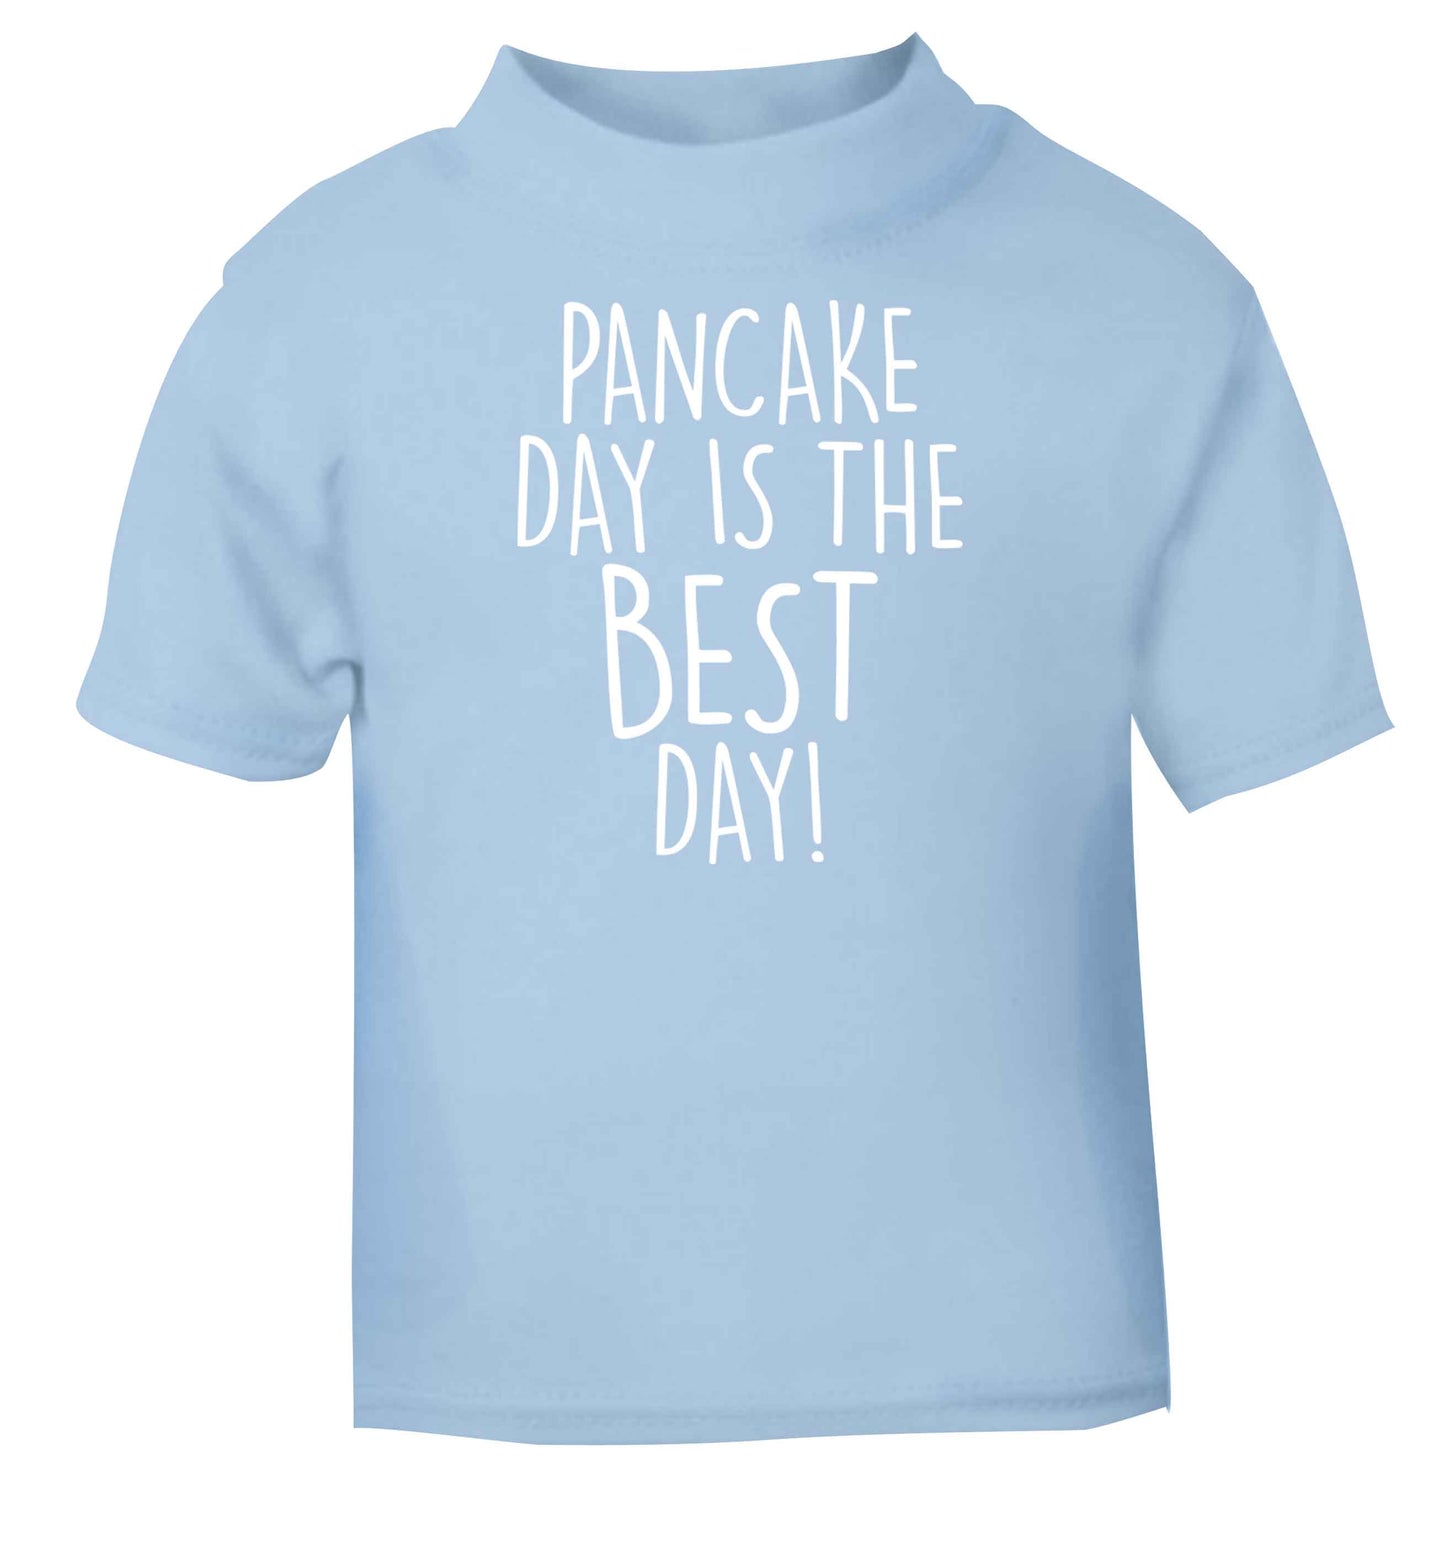 Pancake day is the best day light blue baby toddler Tshirt 2 Years